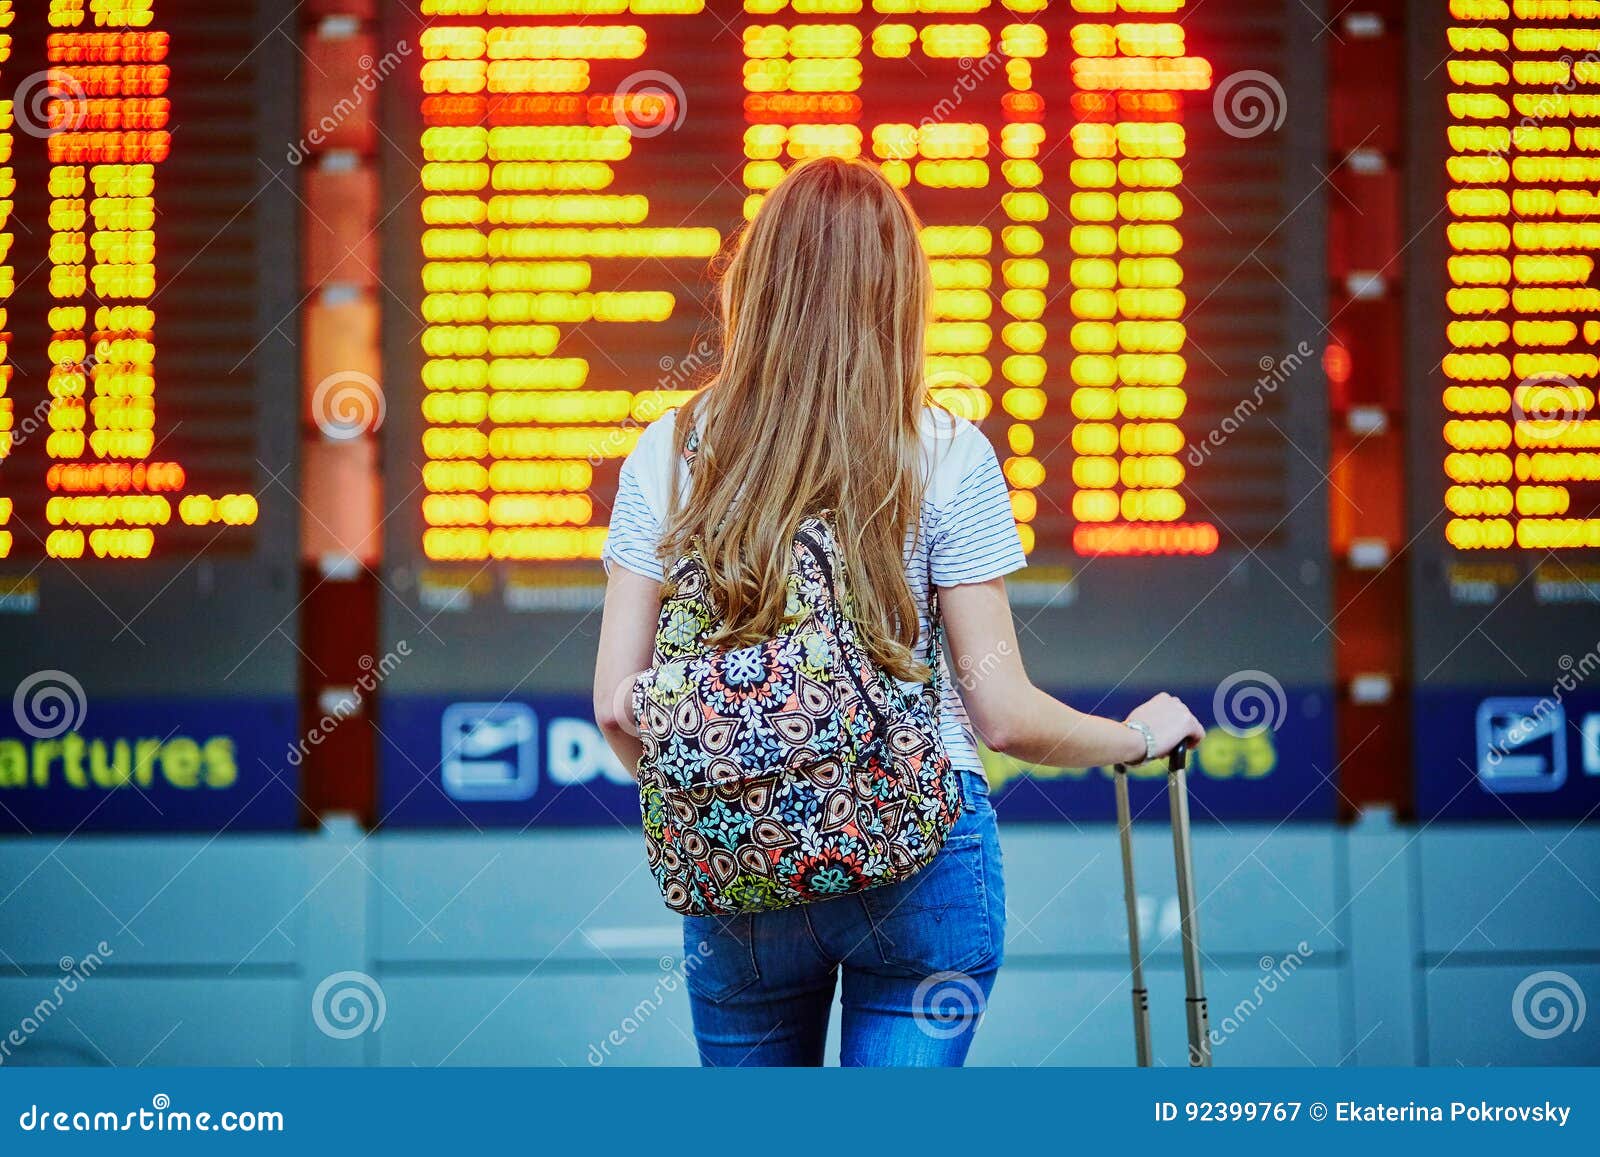 tourist girl with backpack and carry on luggage in international airport, near flight information board